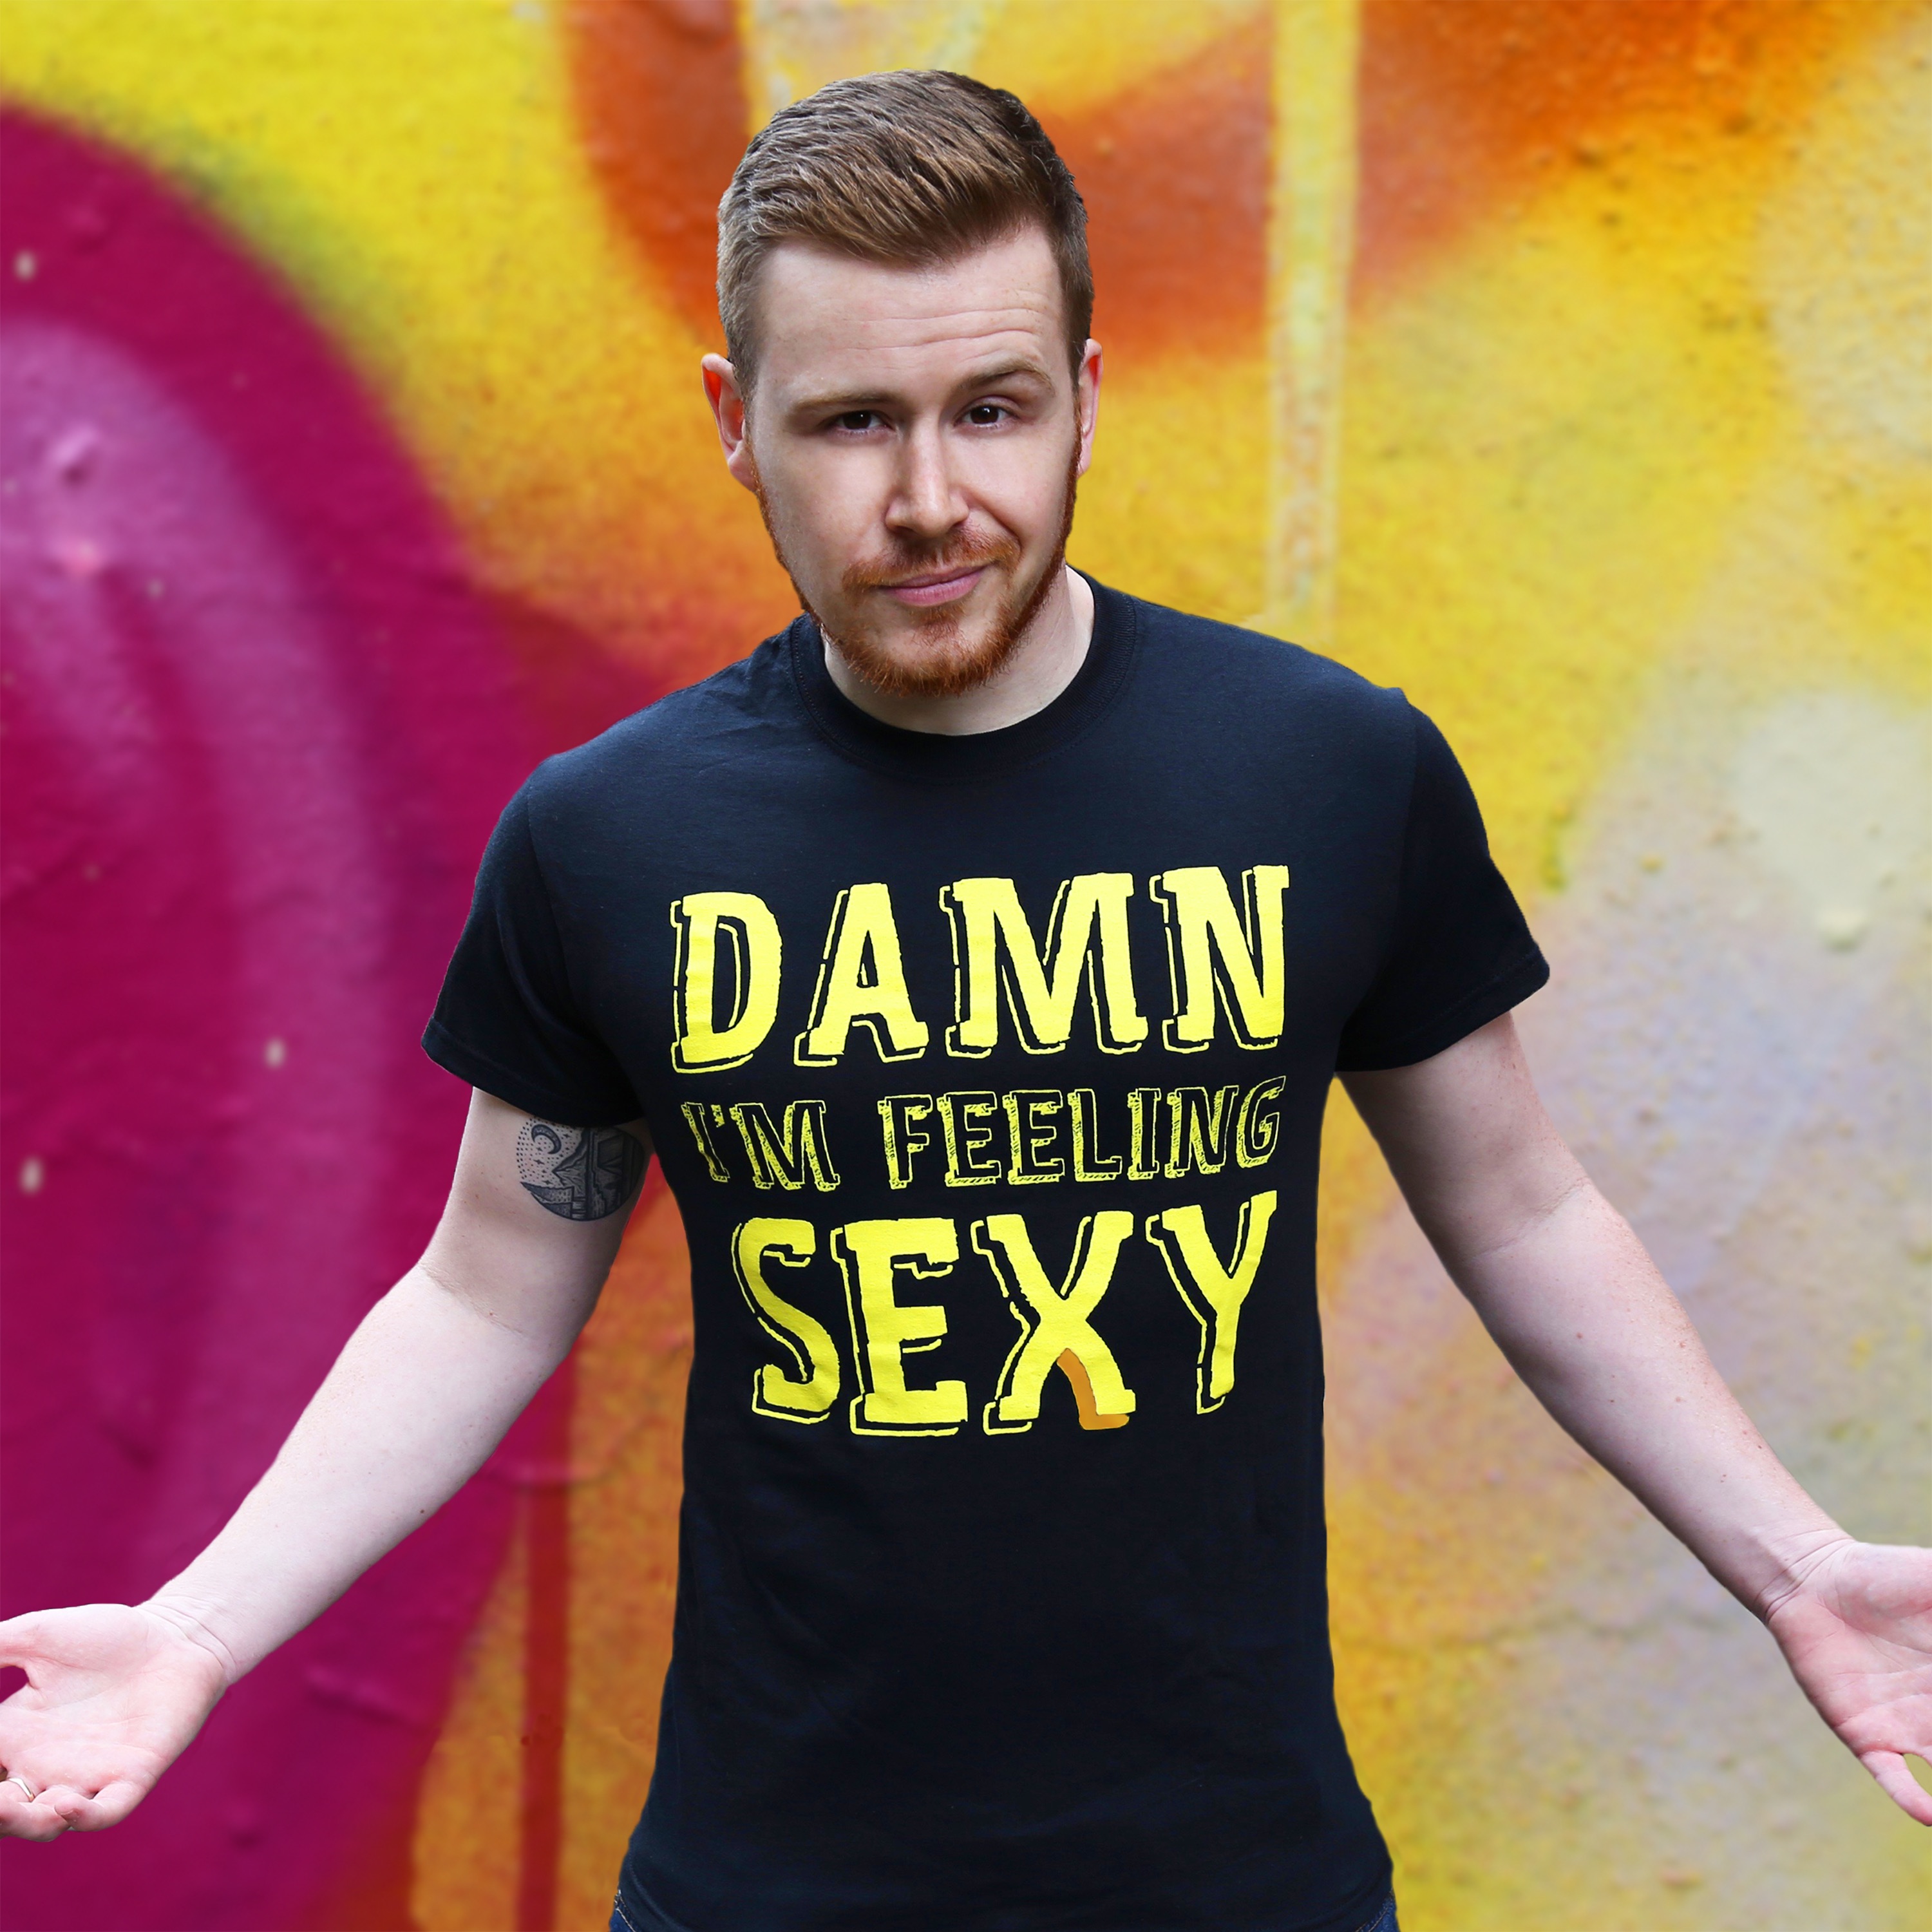 The Noise Next Doors “damn Im Feeling Sexy” T Shirt Black And